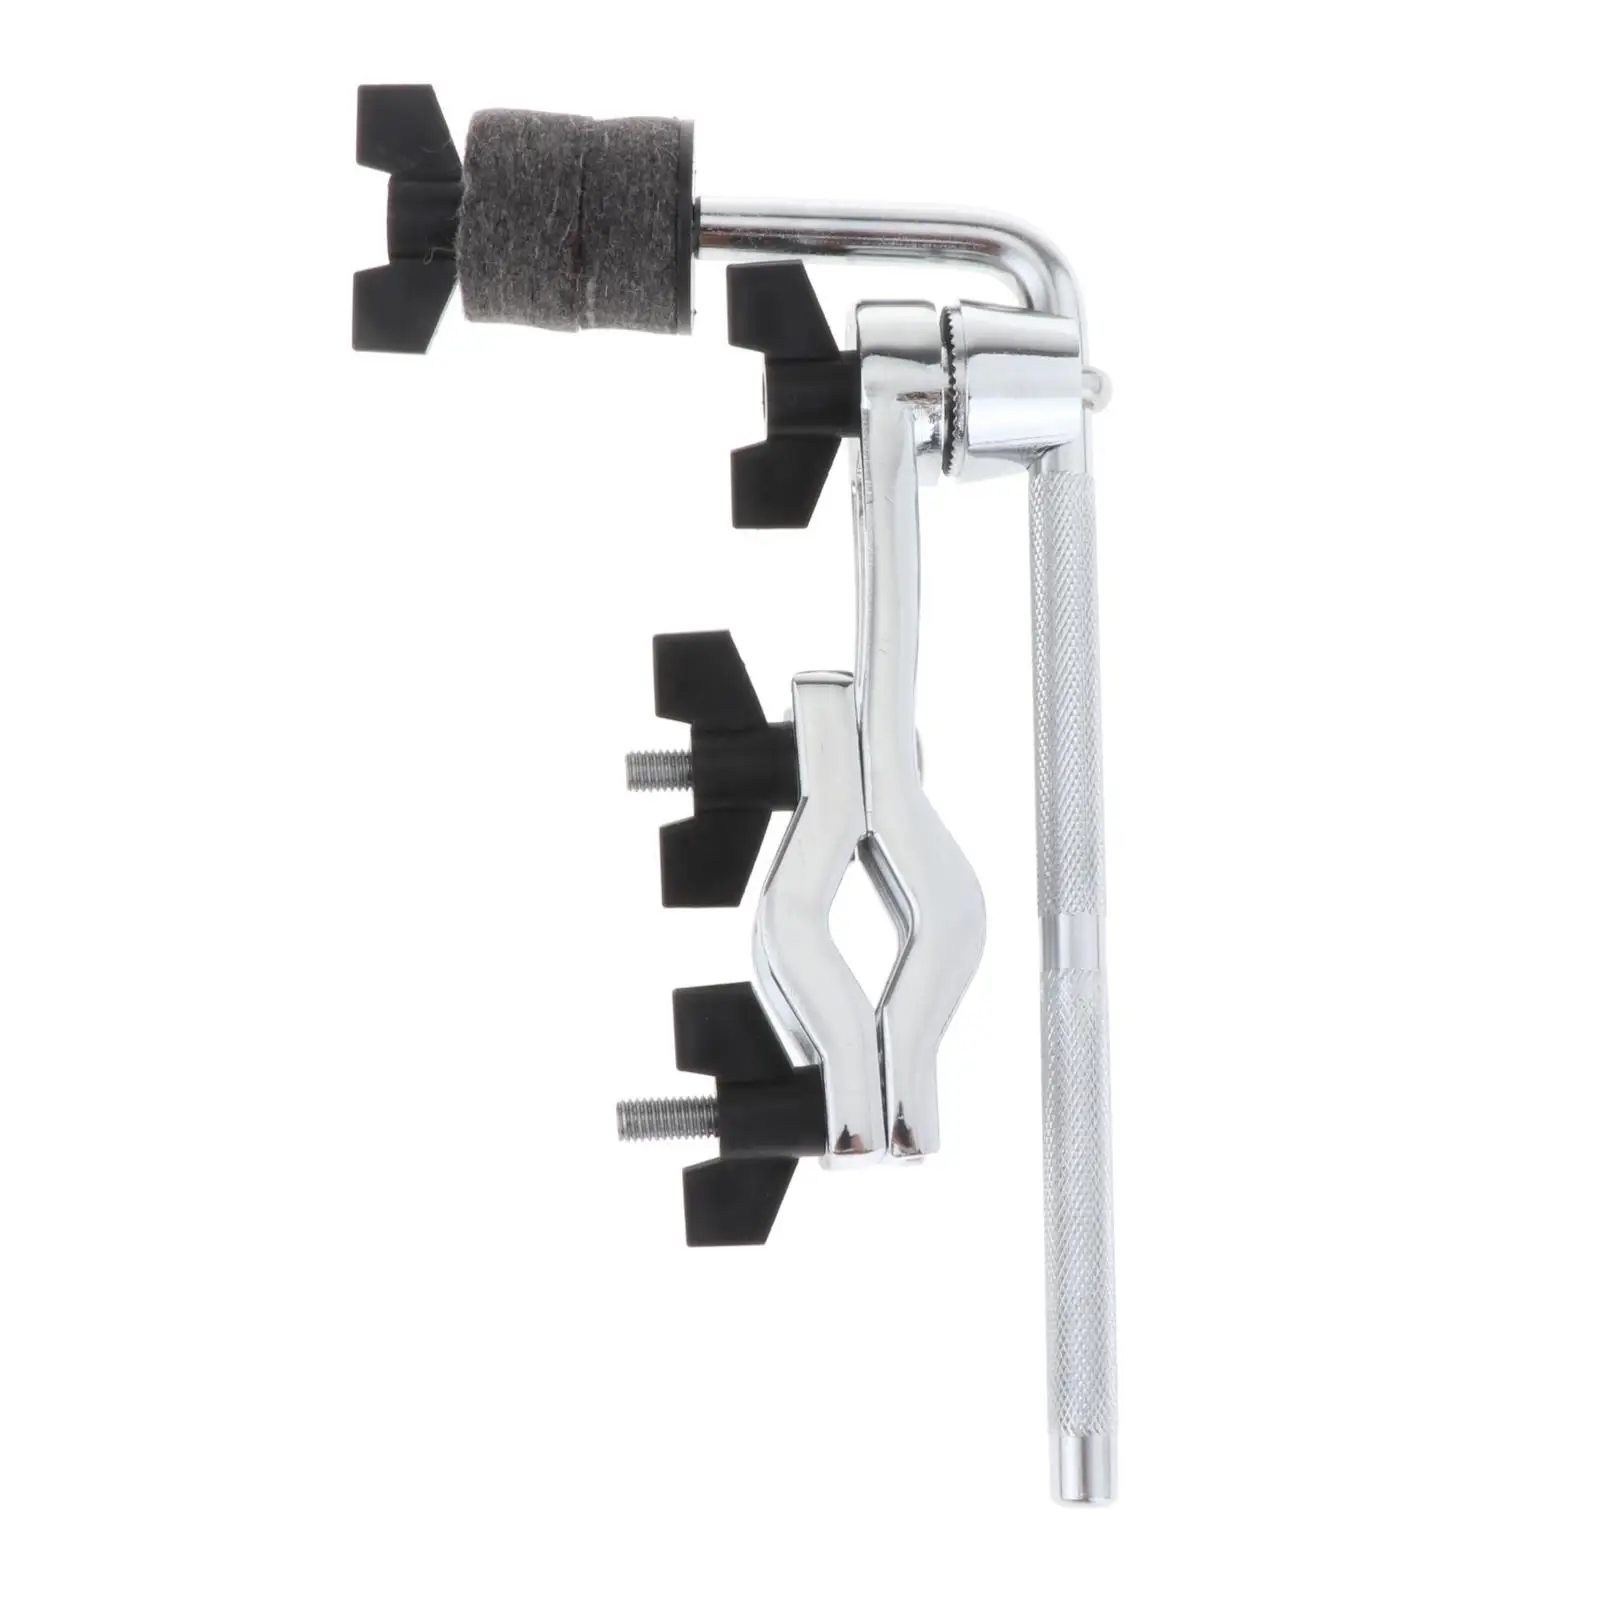 Drum Kit Clip Adjustable Replacement Accessories Heavy Duty Professional Holder